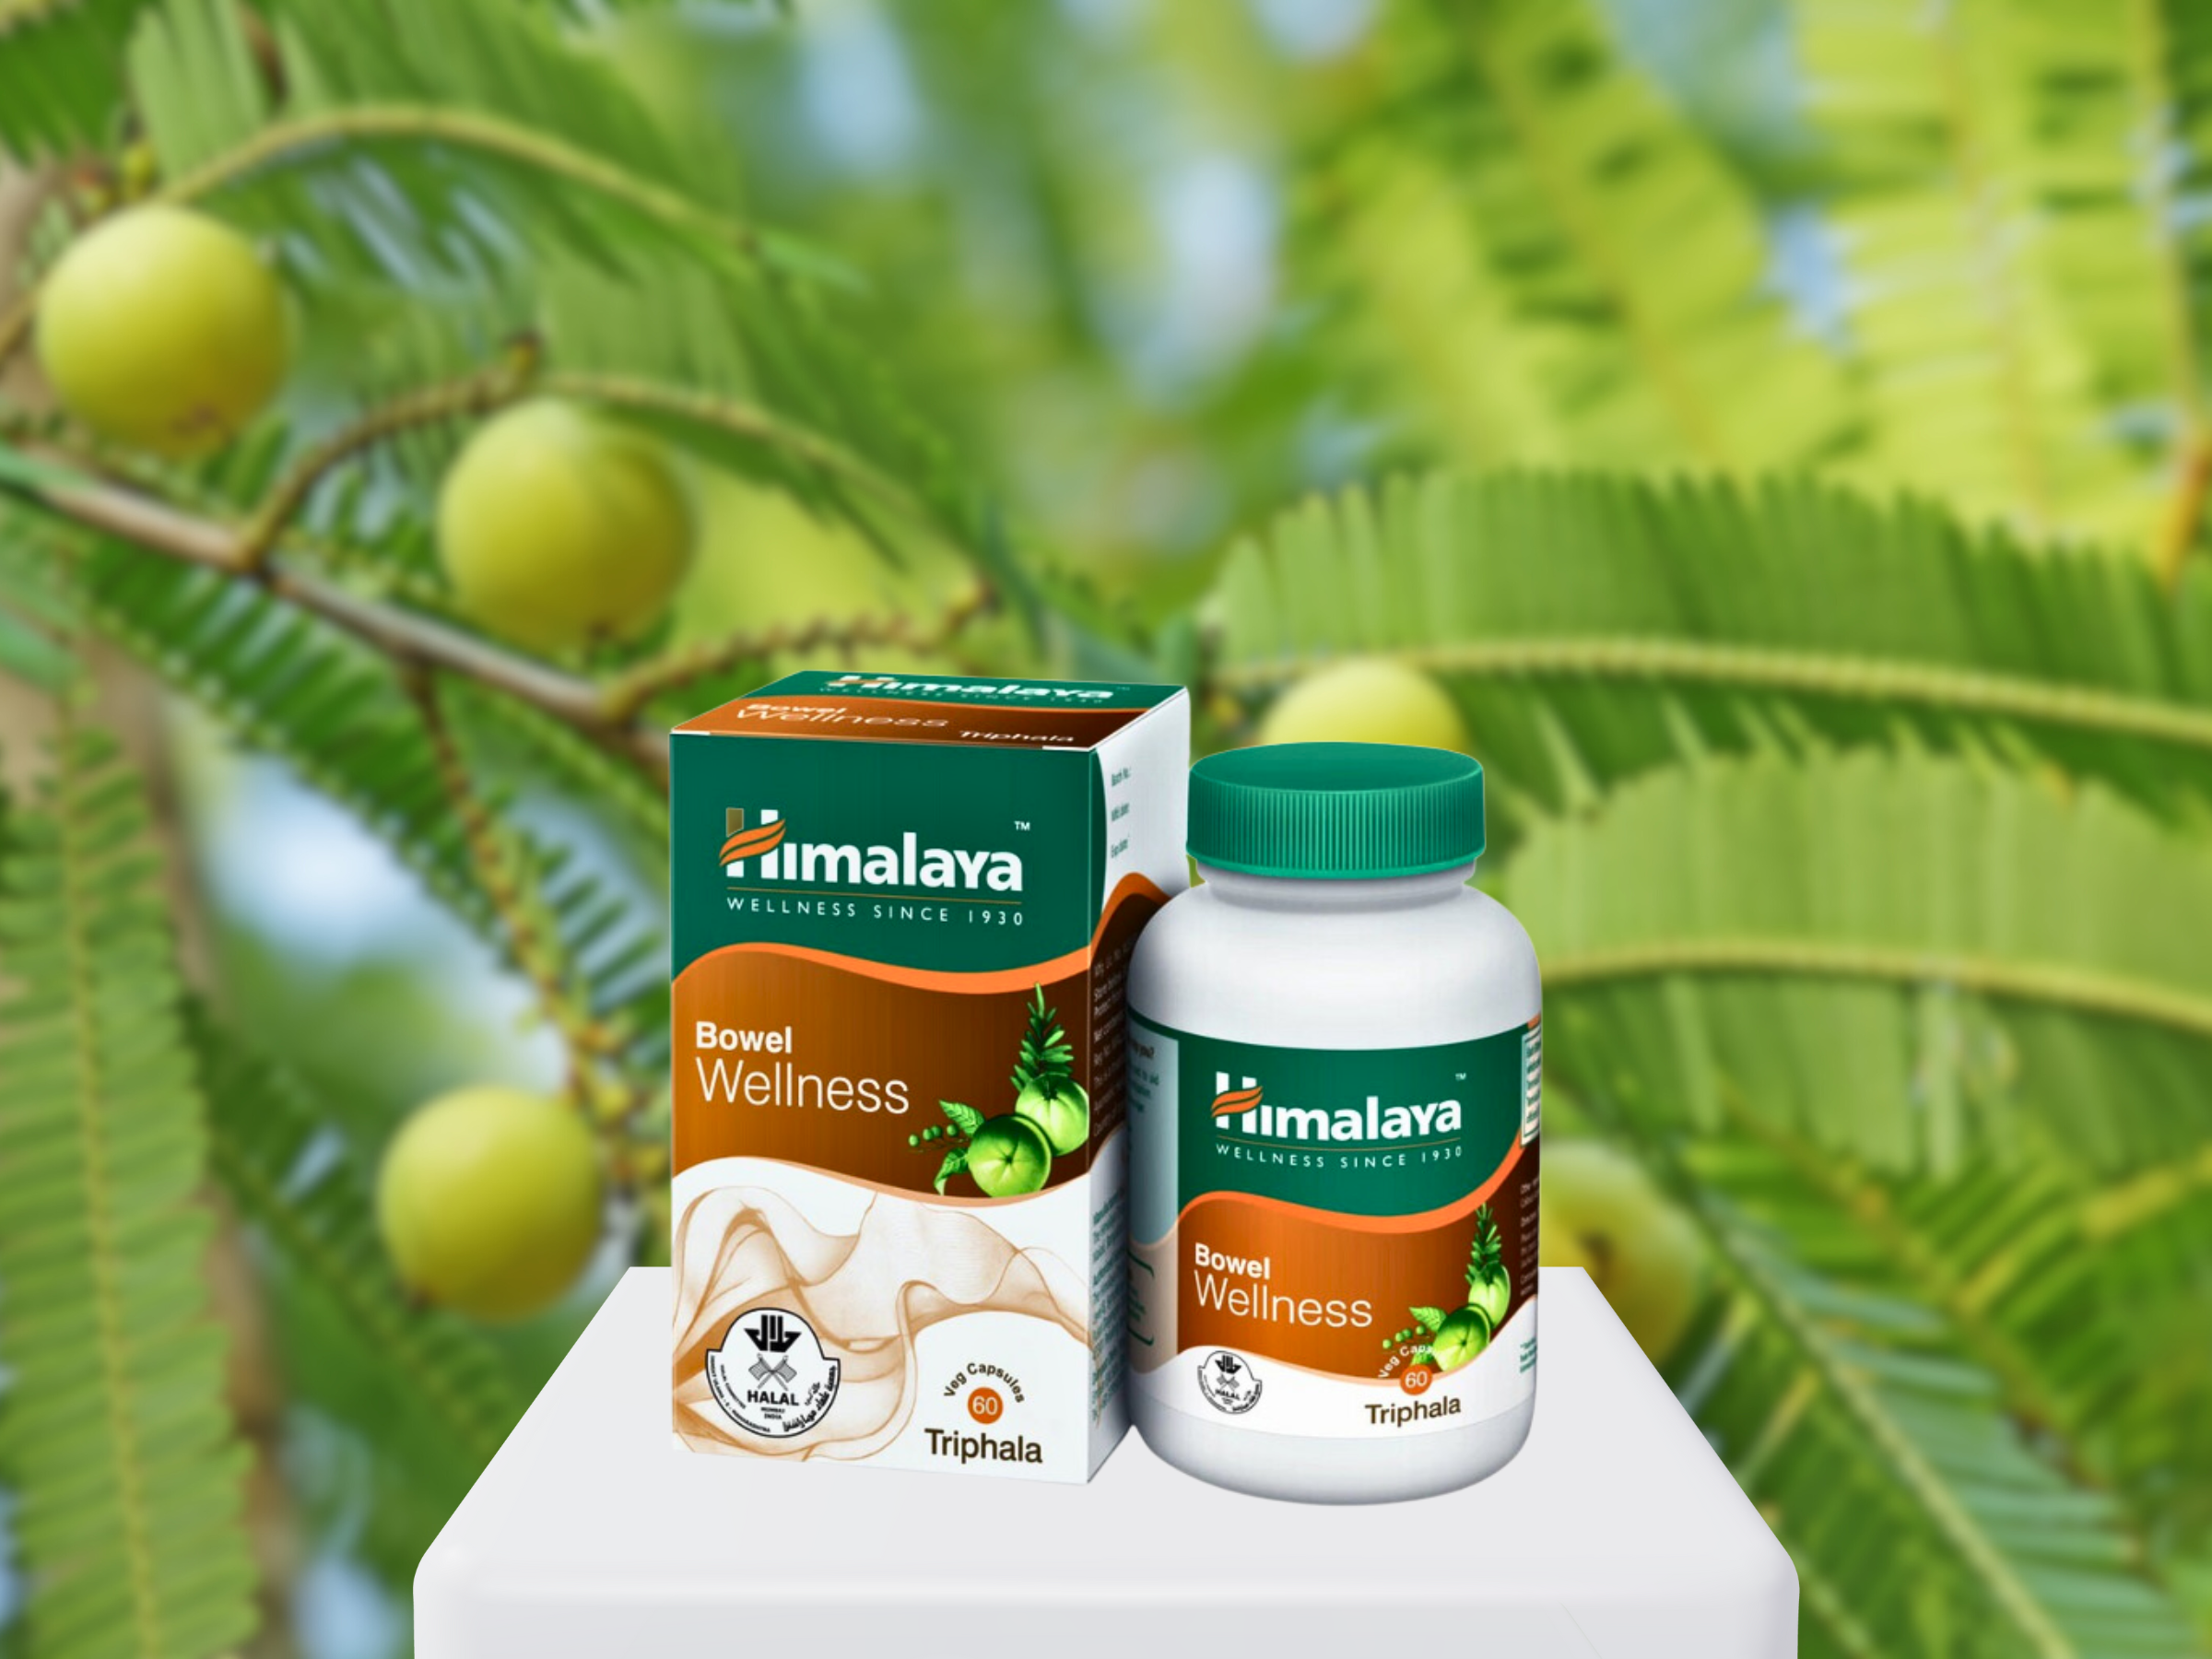 Himalaya Bowel Wellness placed on a product display stand, with Indian Gooseberry tree (or Amalaki tree) in the background